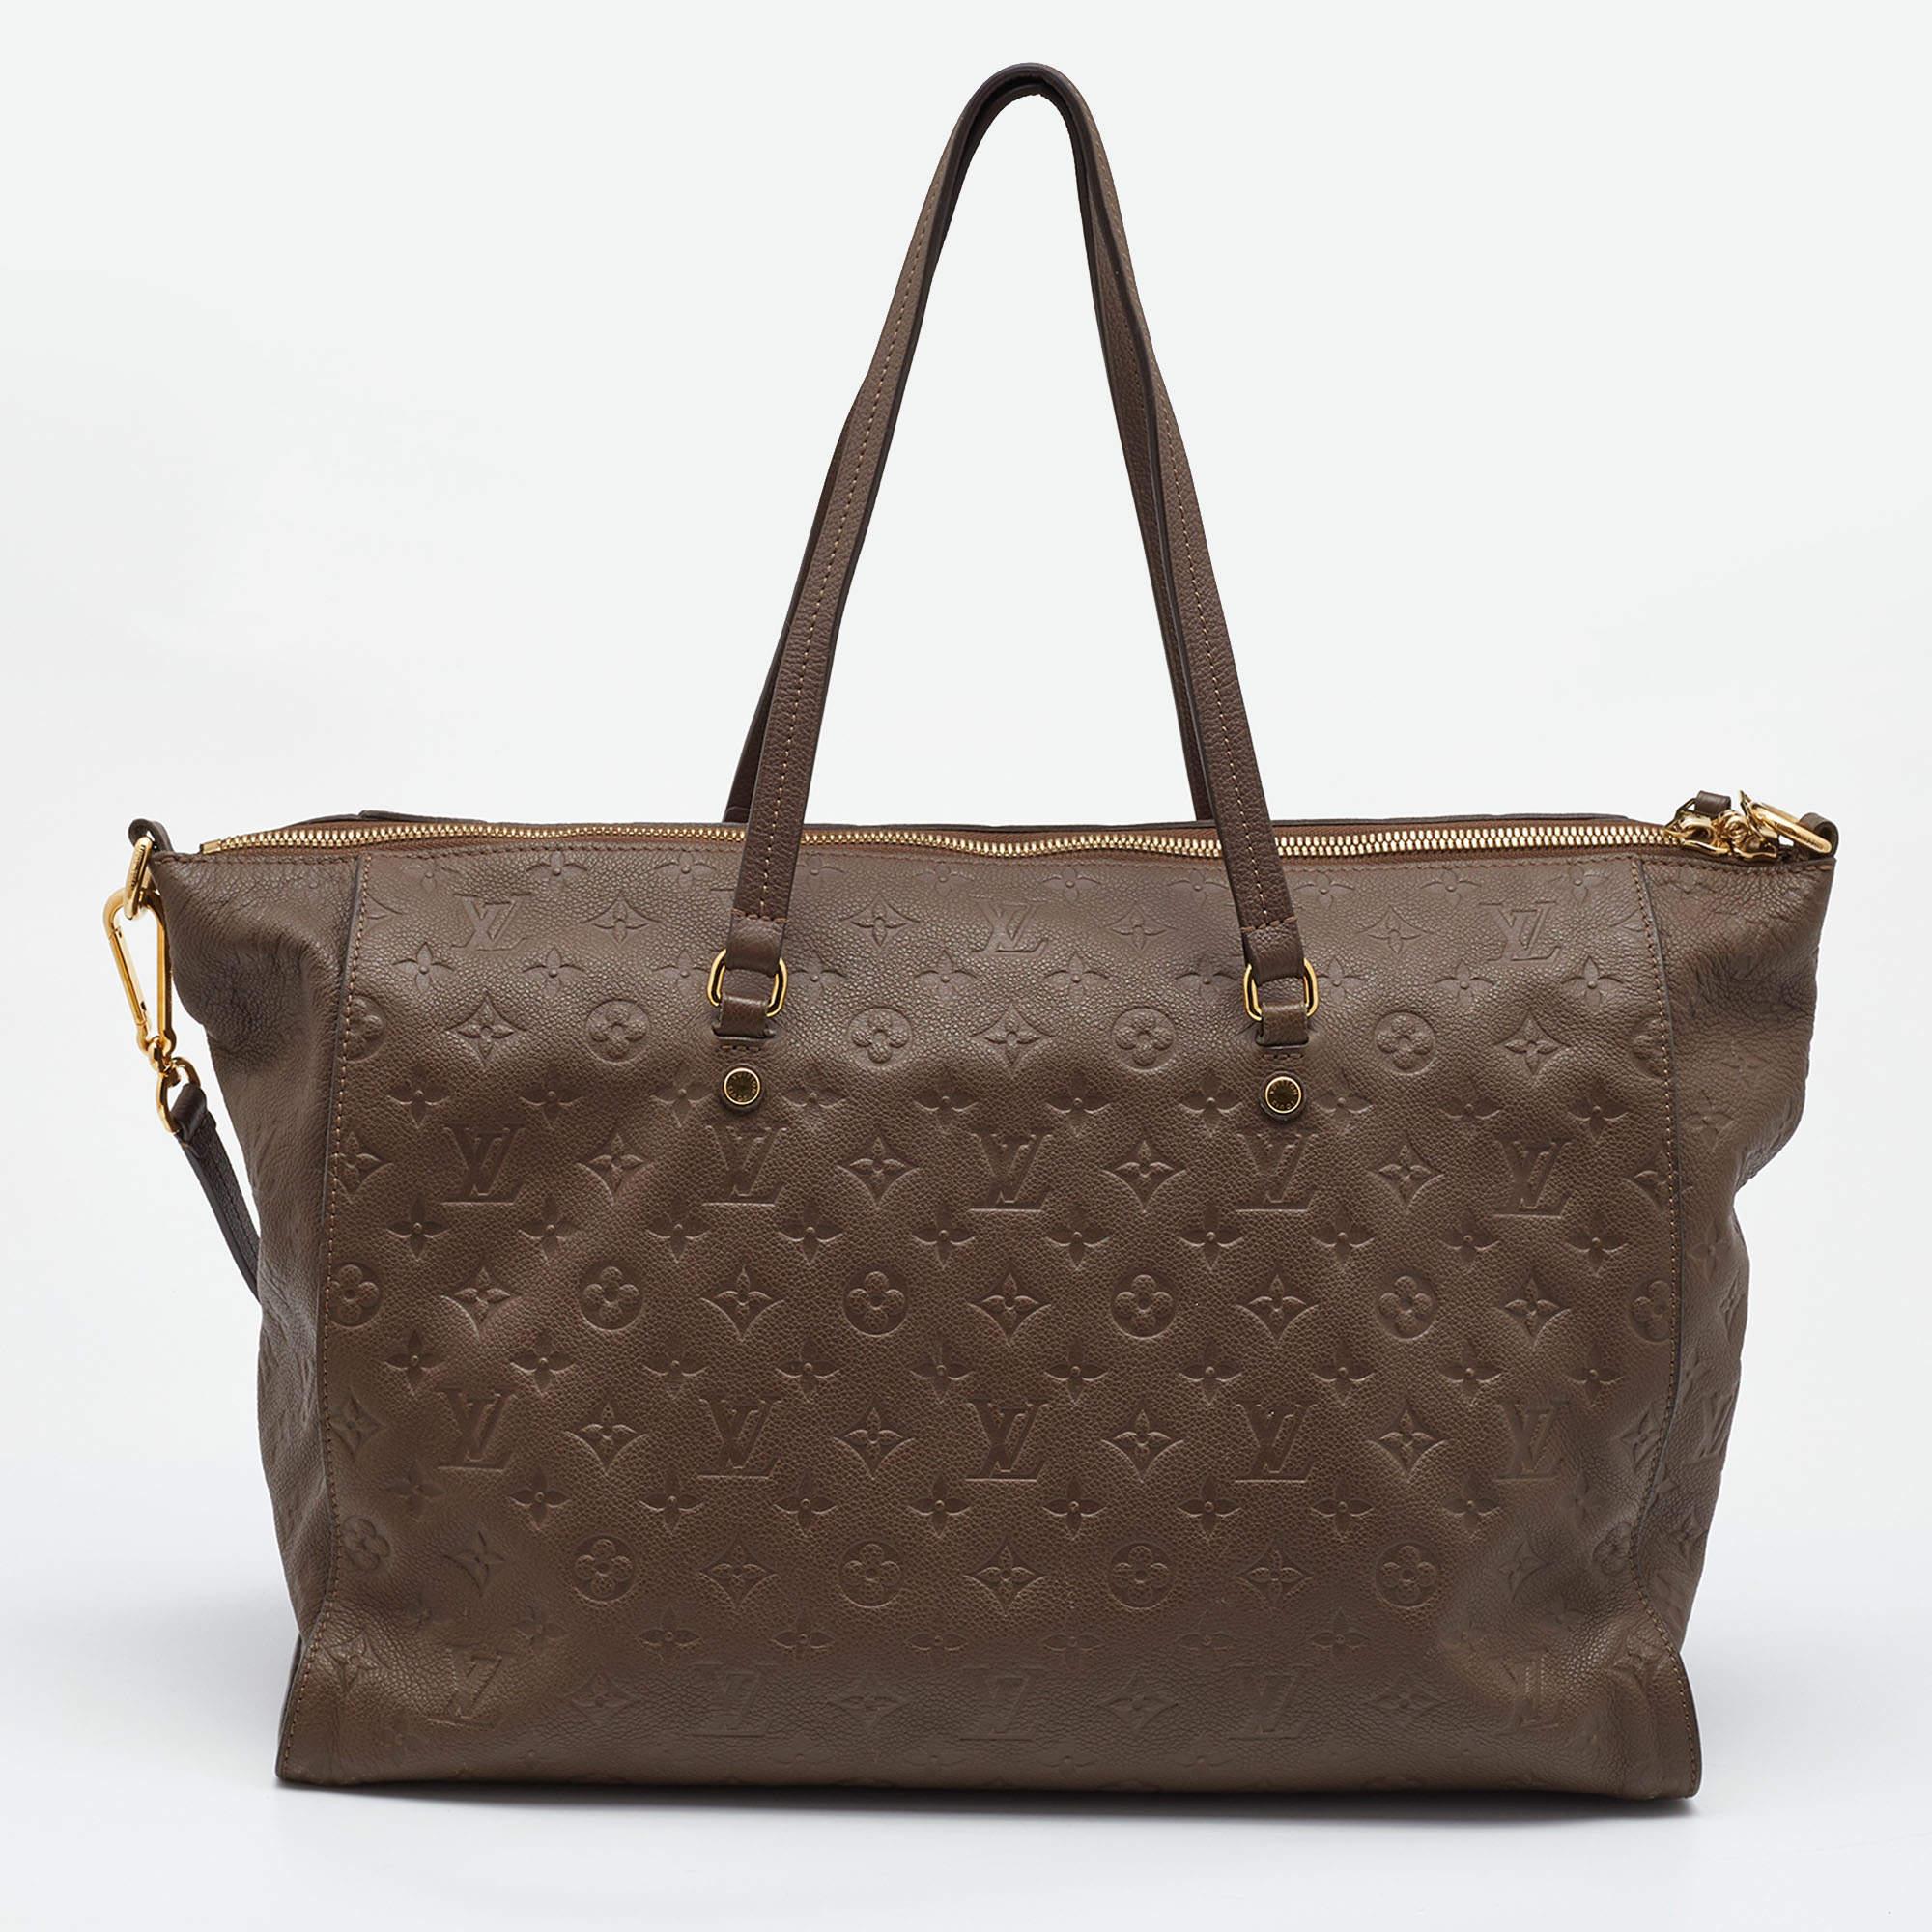 This Louis Vuitton accessory is an example of the brand's fine designs that are skillfully crafted to project a classic charm. It is a functional creation with an elevating appeal.

Includes: Original Dustbag, Detachable Strap

